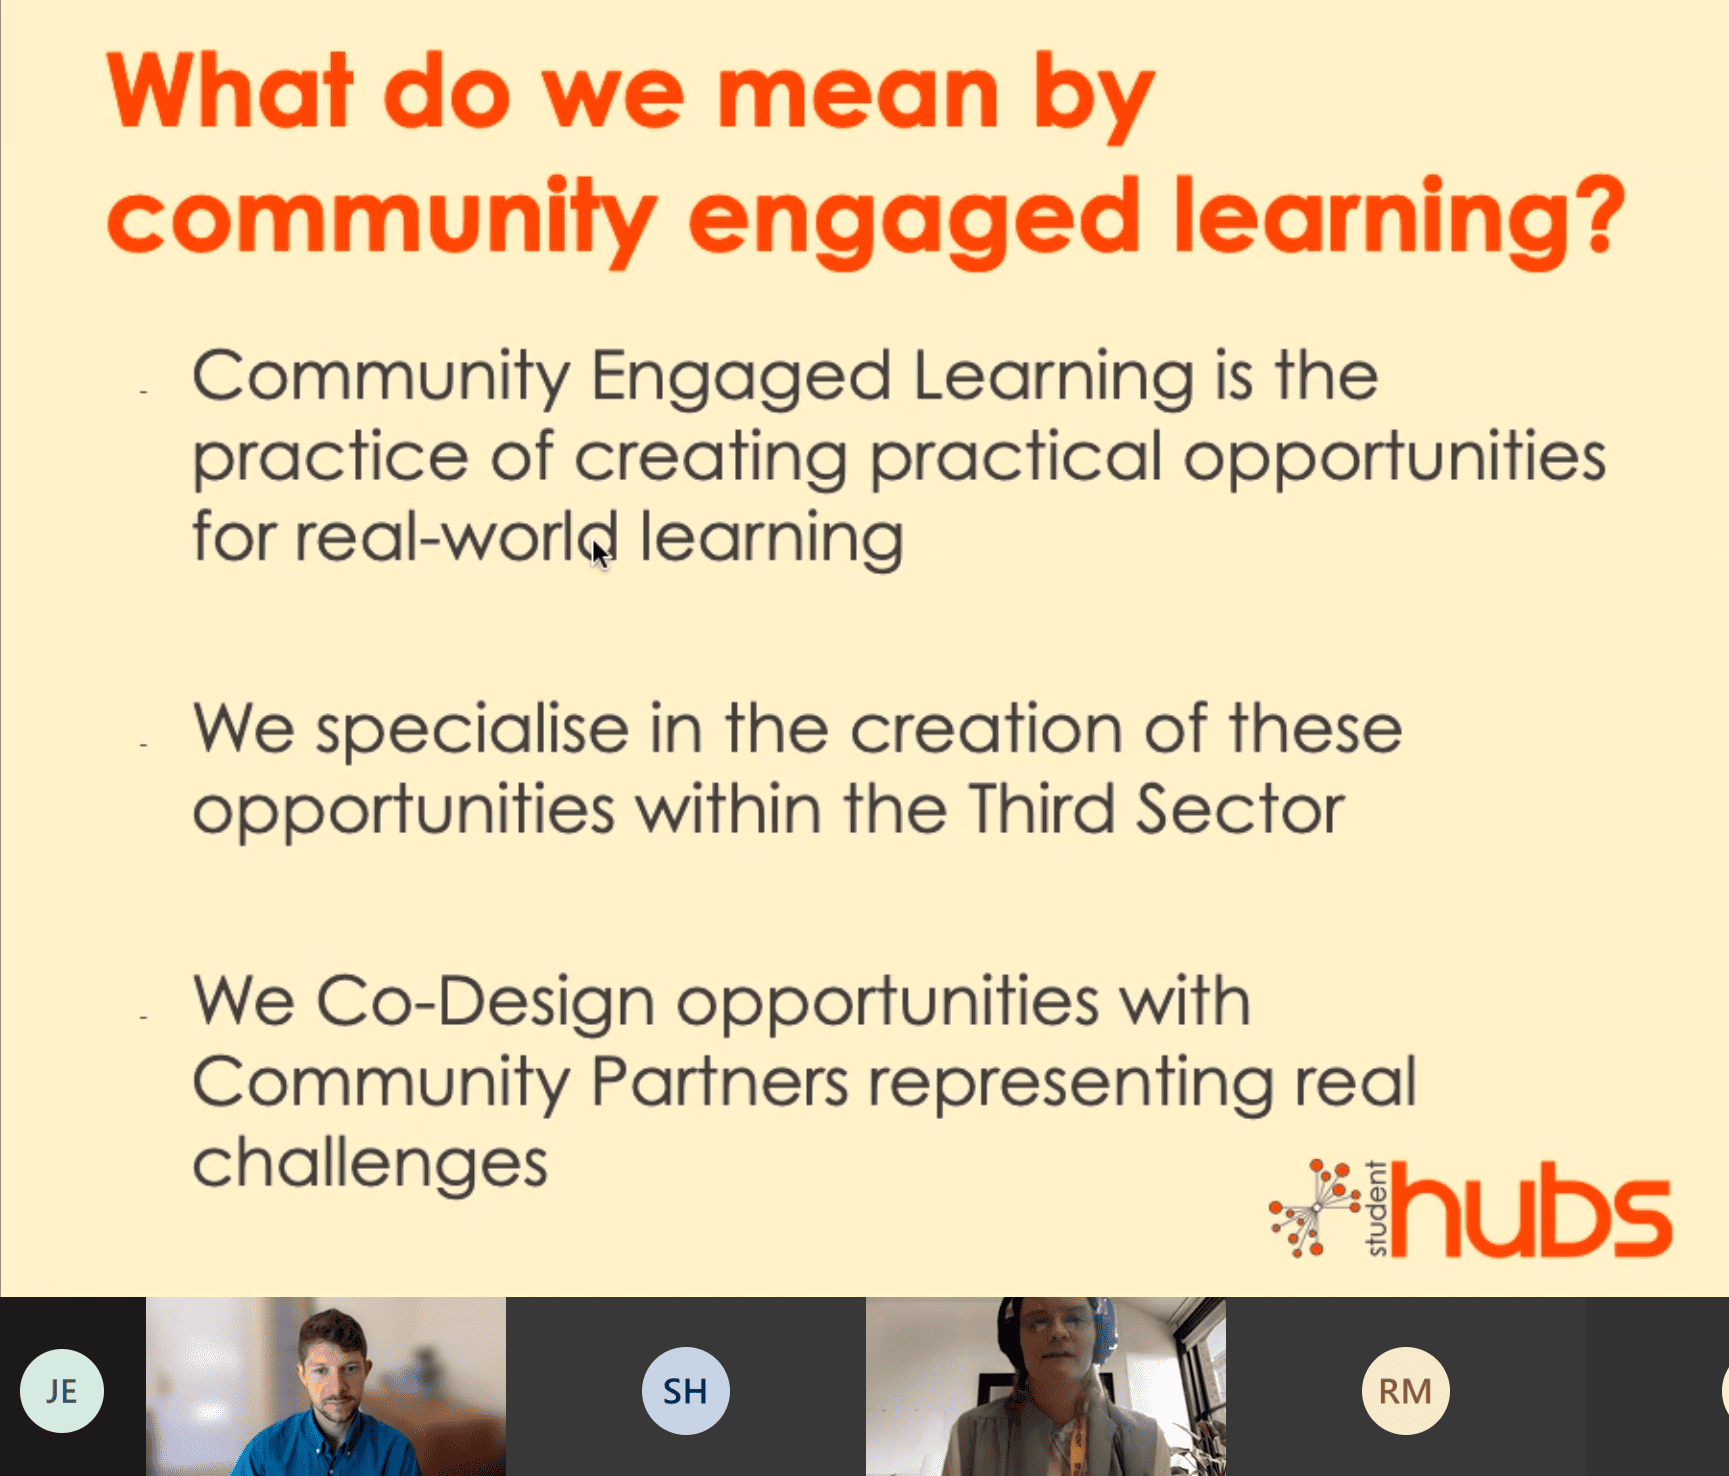 Screenshot of a presentation. The slide is pale yellow with an orange title reading "What do we mean by community engaged learning?". Below this black text reads "Community engaged Learning is the practice of creating practical opportunities for real world learning. We specialise in the creation of these opportunities within the Third Sector. We Co-Design opportunities with Community Partners representing real challenges. Below the slide you can see the two presenters looking at the screen. 